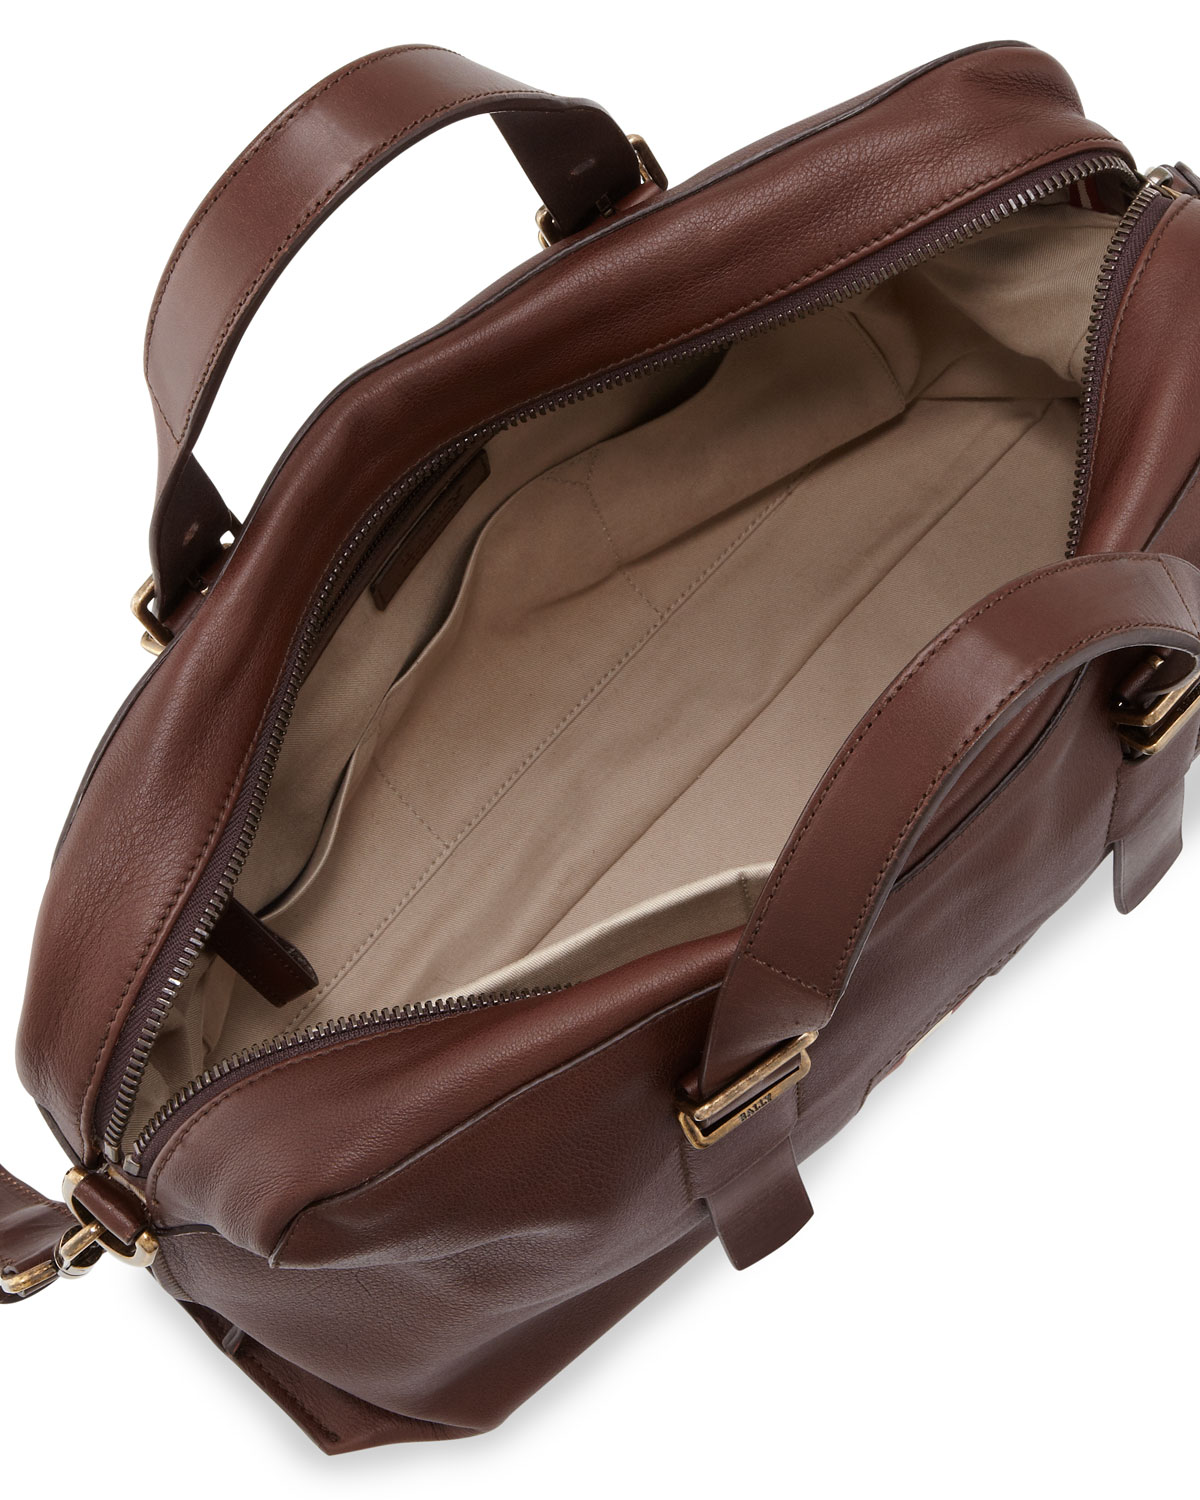 Lyst - Bally Leather Stripe Business Bag in Brown for Men